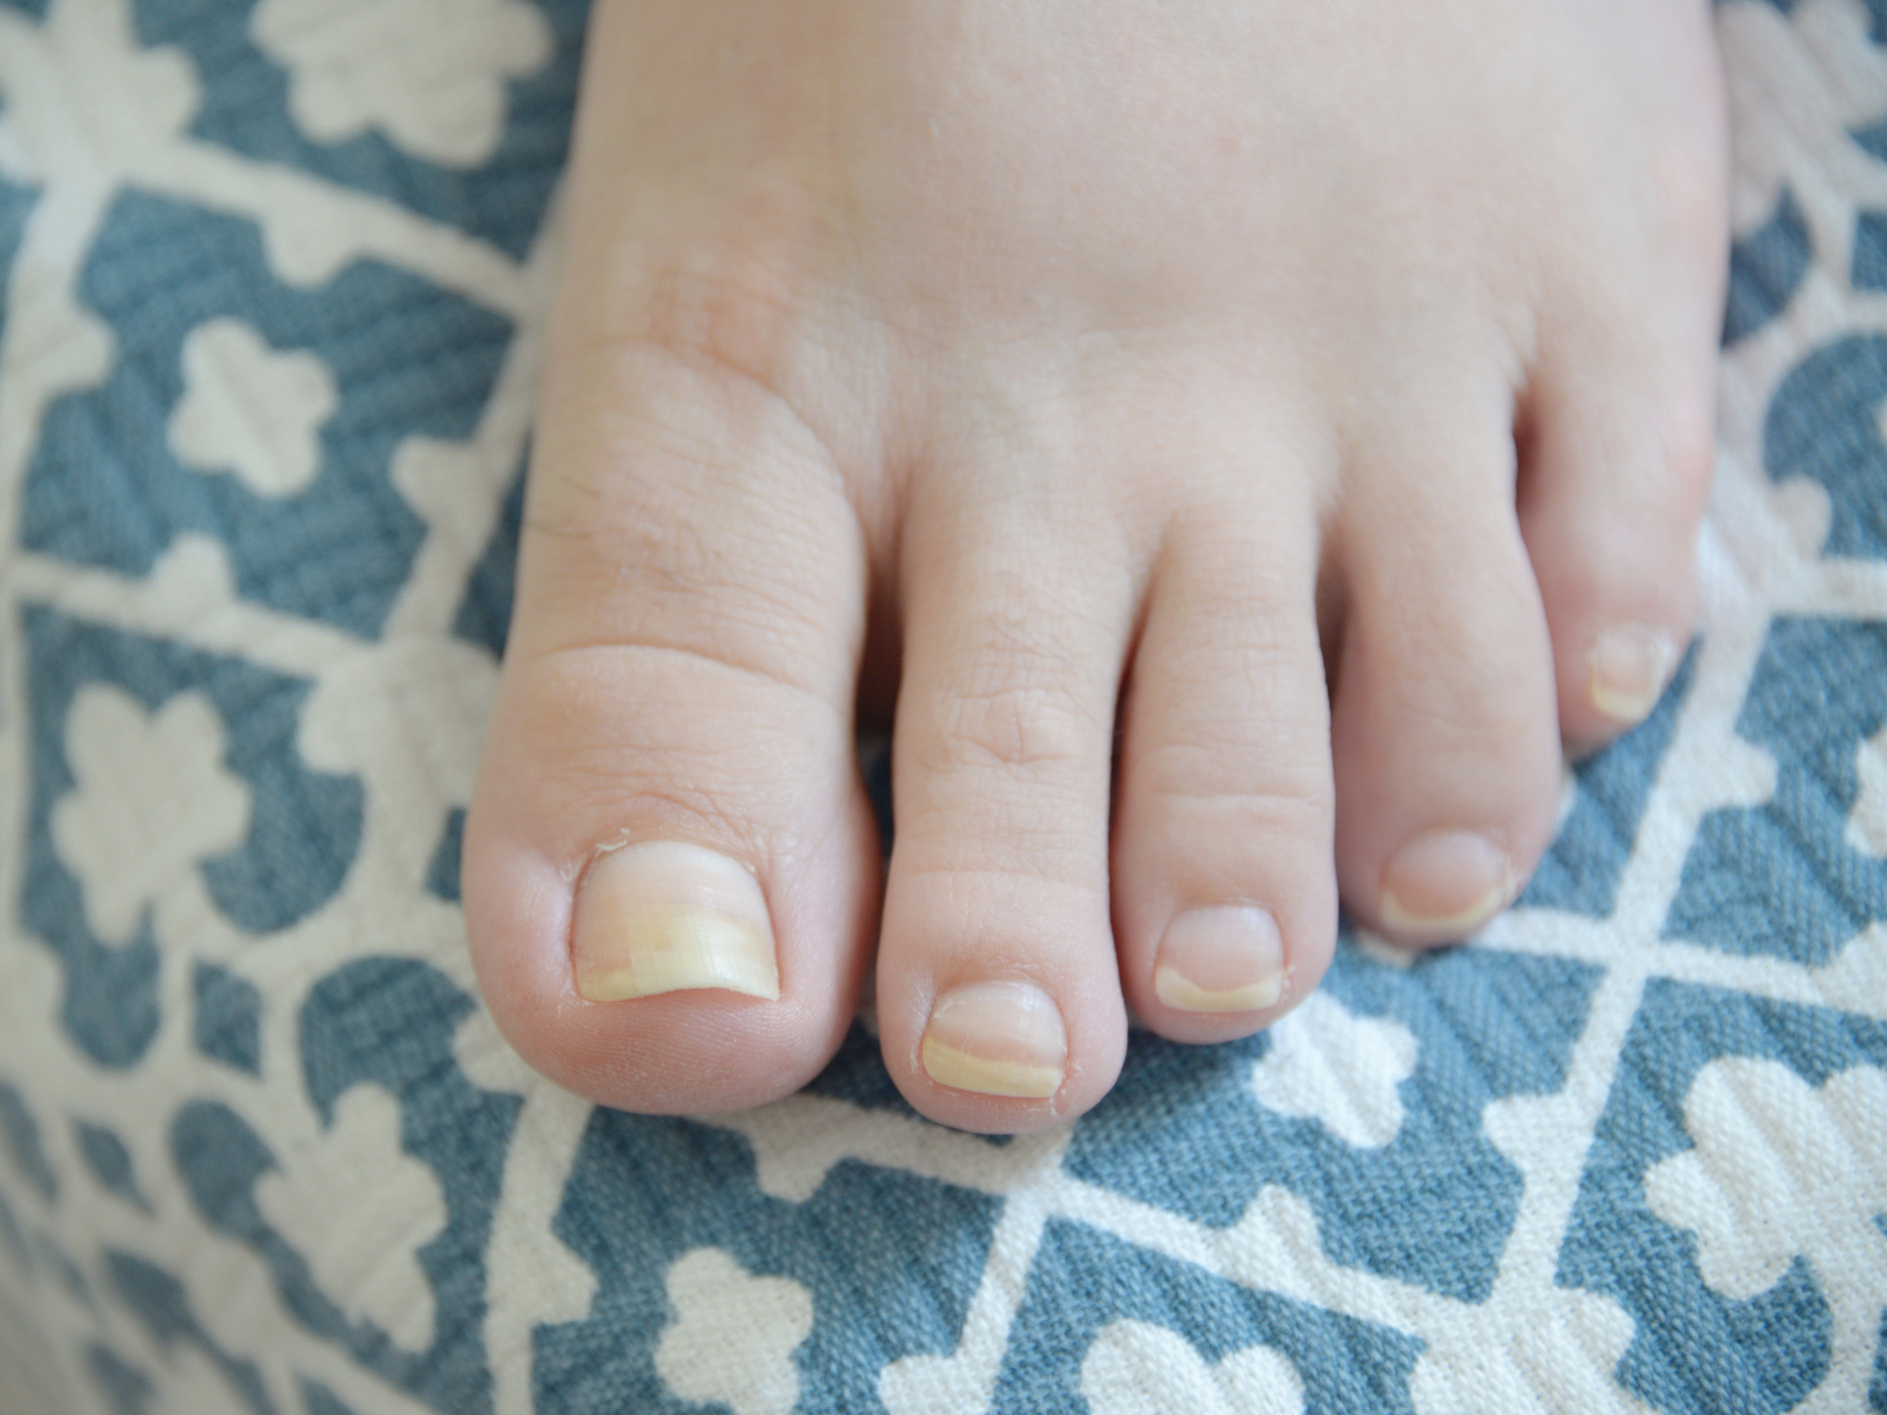 2. Yellow Nail Syndrome - wide 3